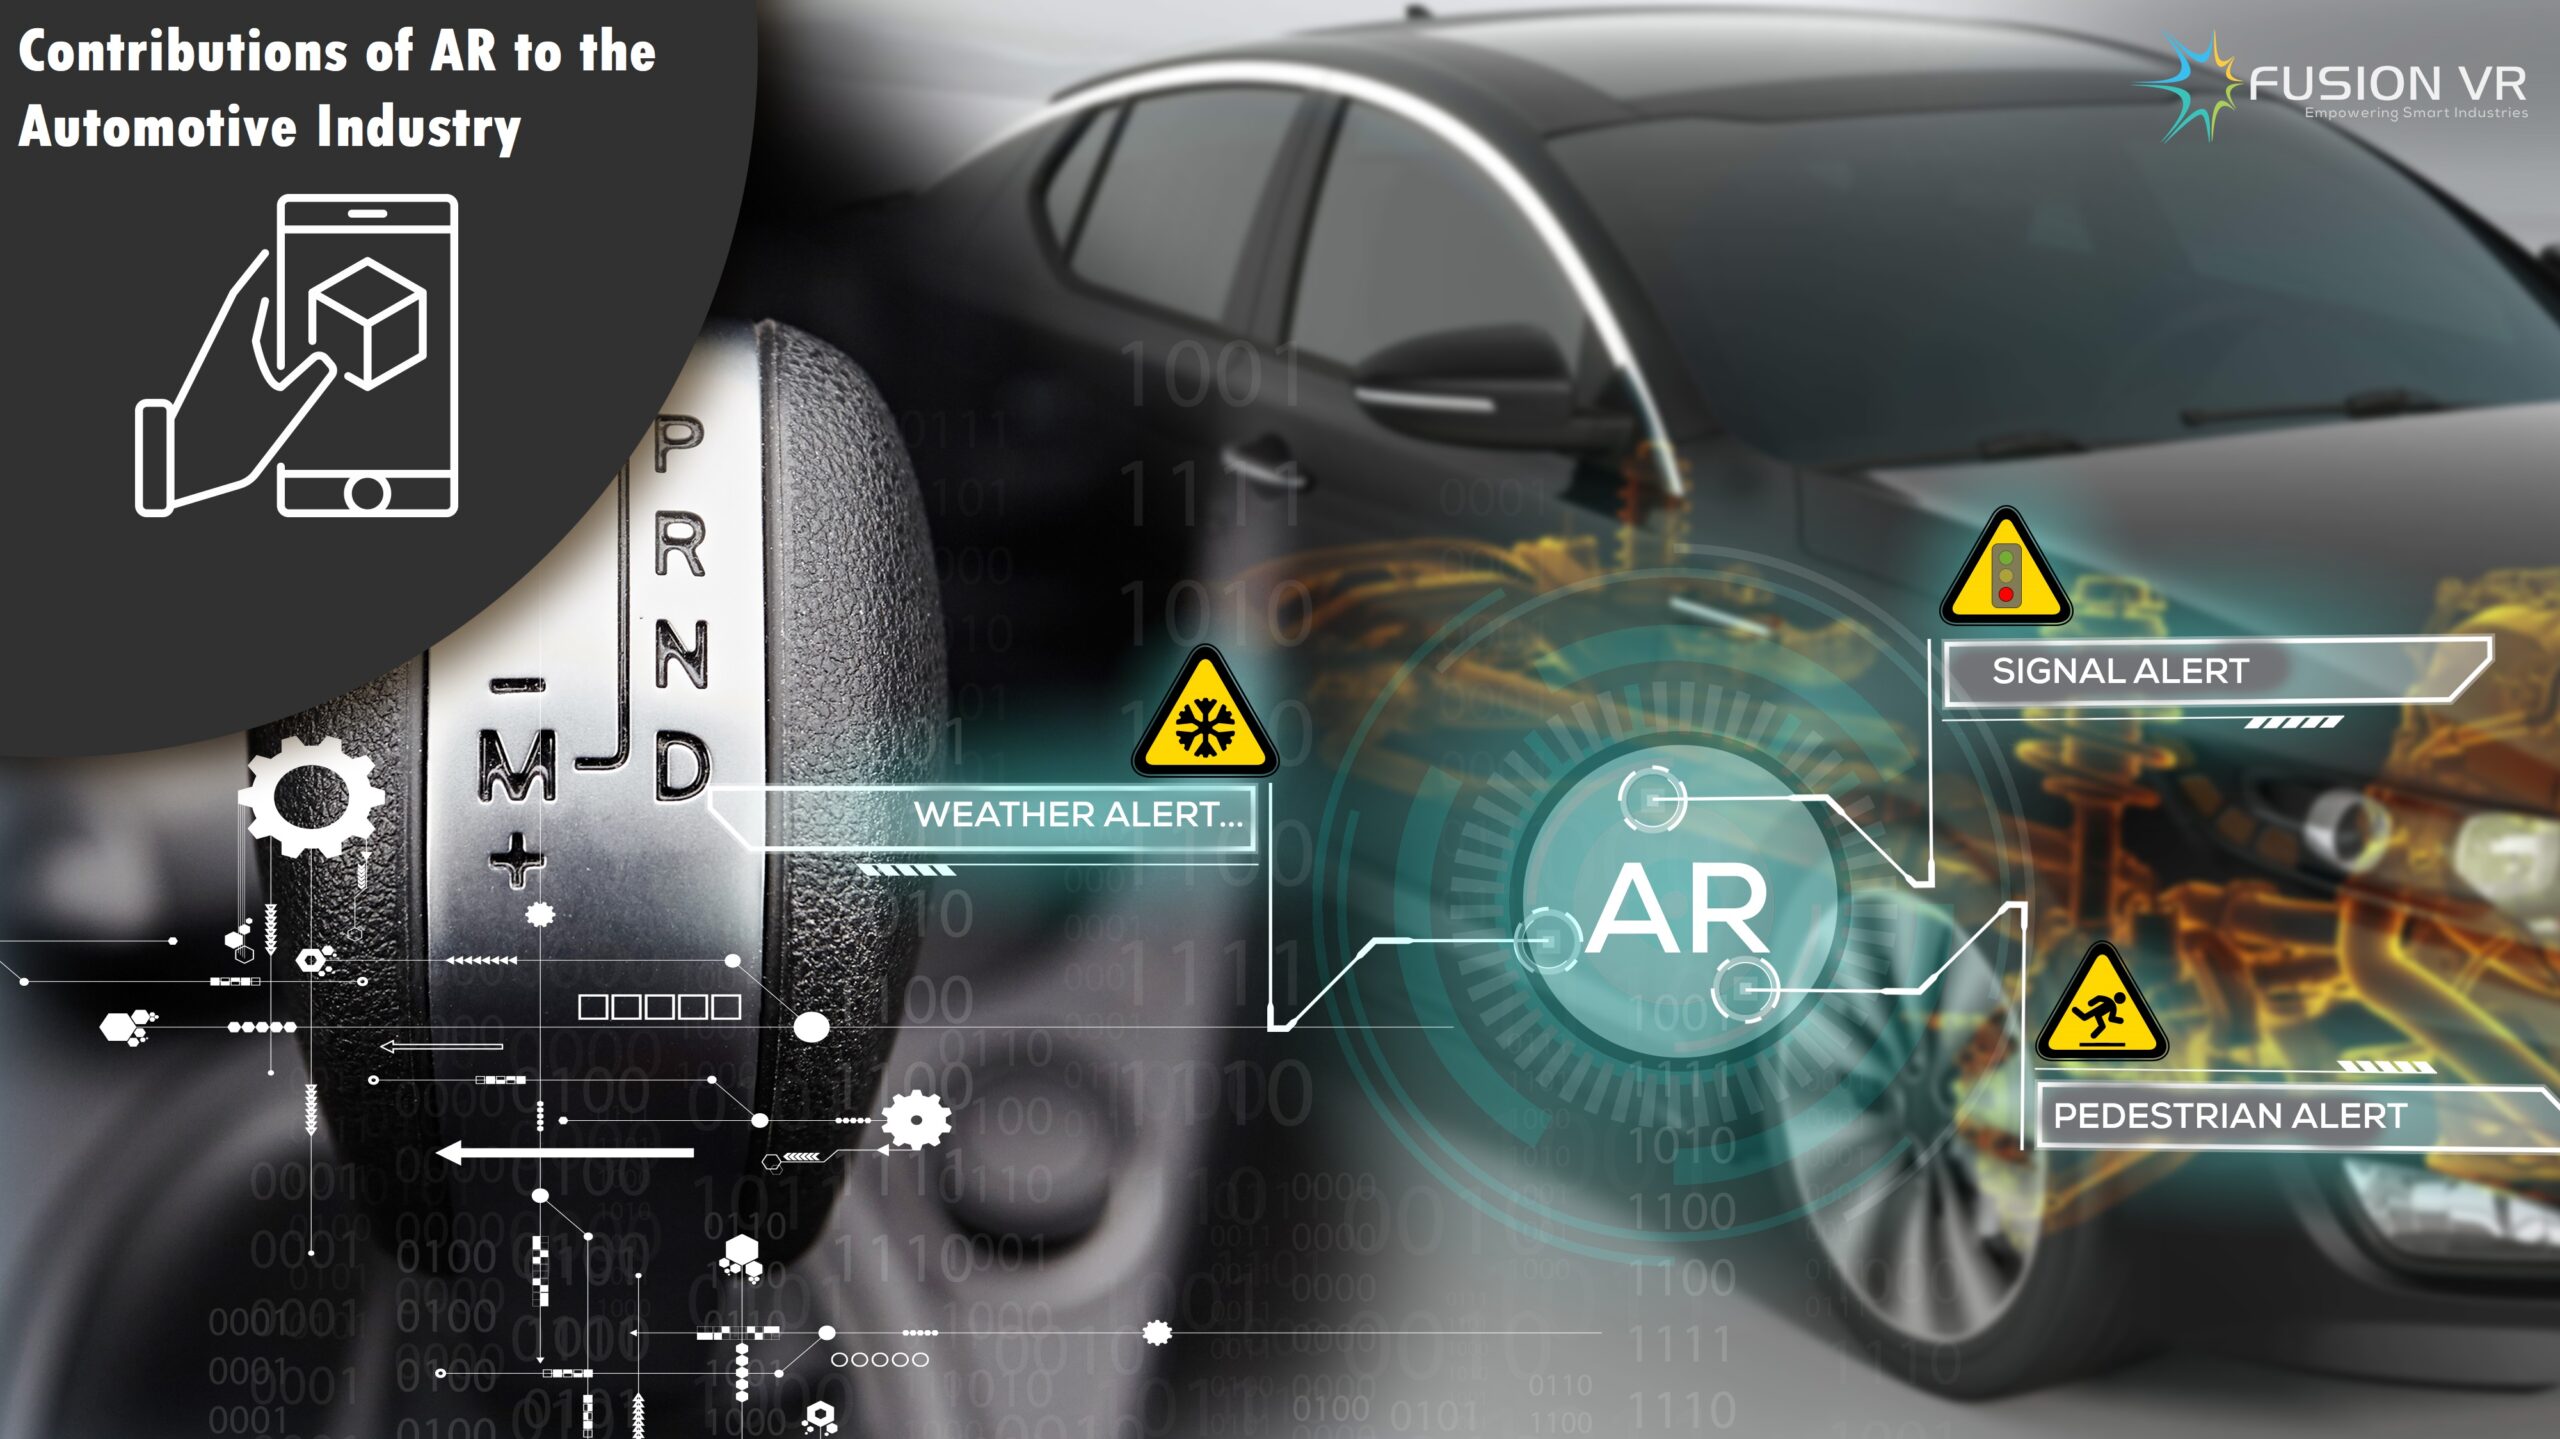 Contributions of AR to the Automotive Industry